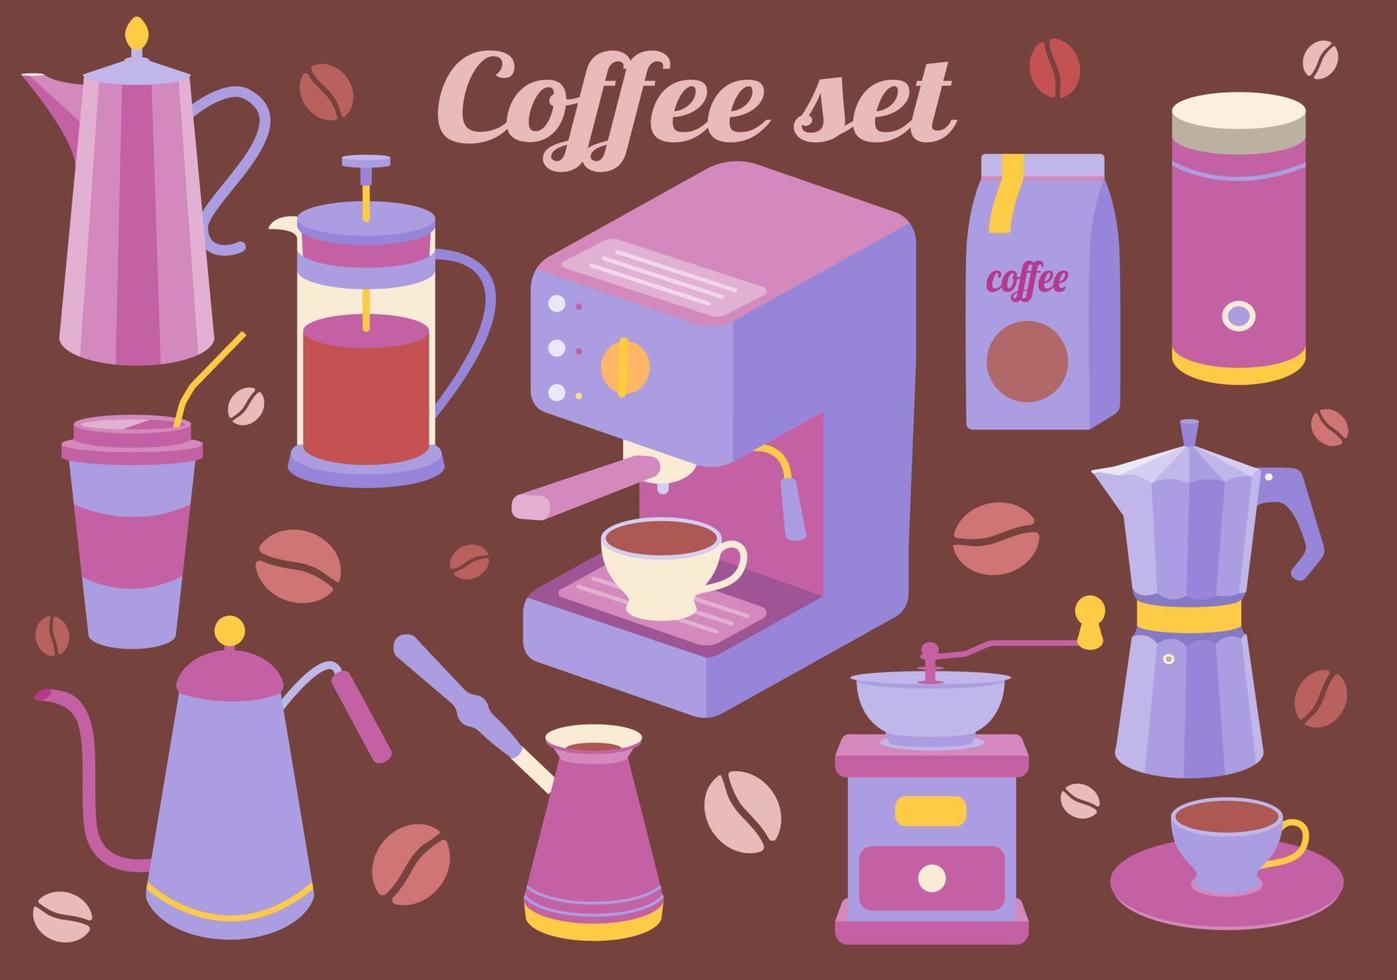 Coffee set of kitchen accessories for making drink. Maker, French press, pot, coffee machine, grinder, grains. Vector illustration